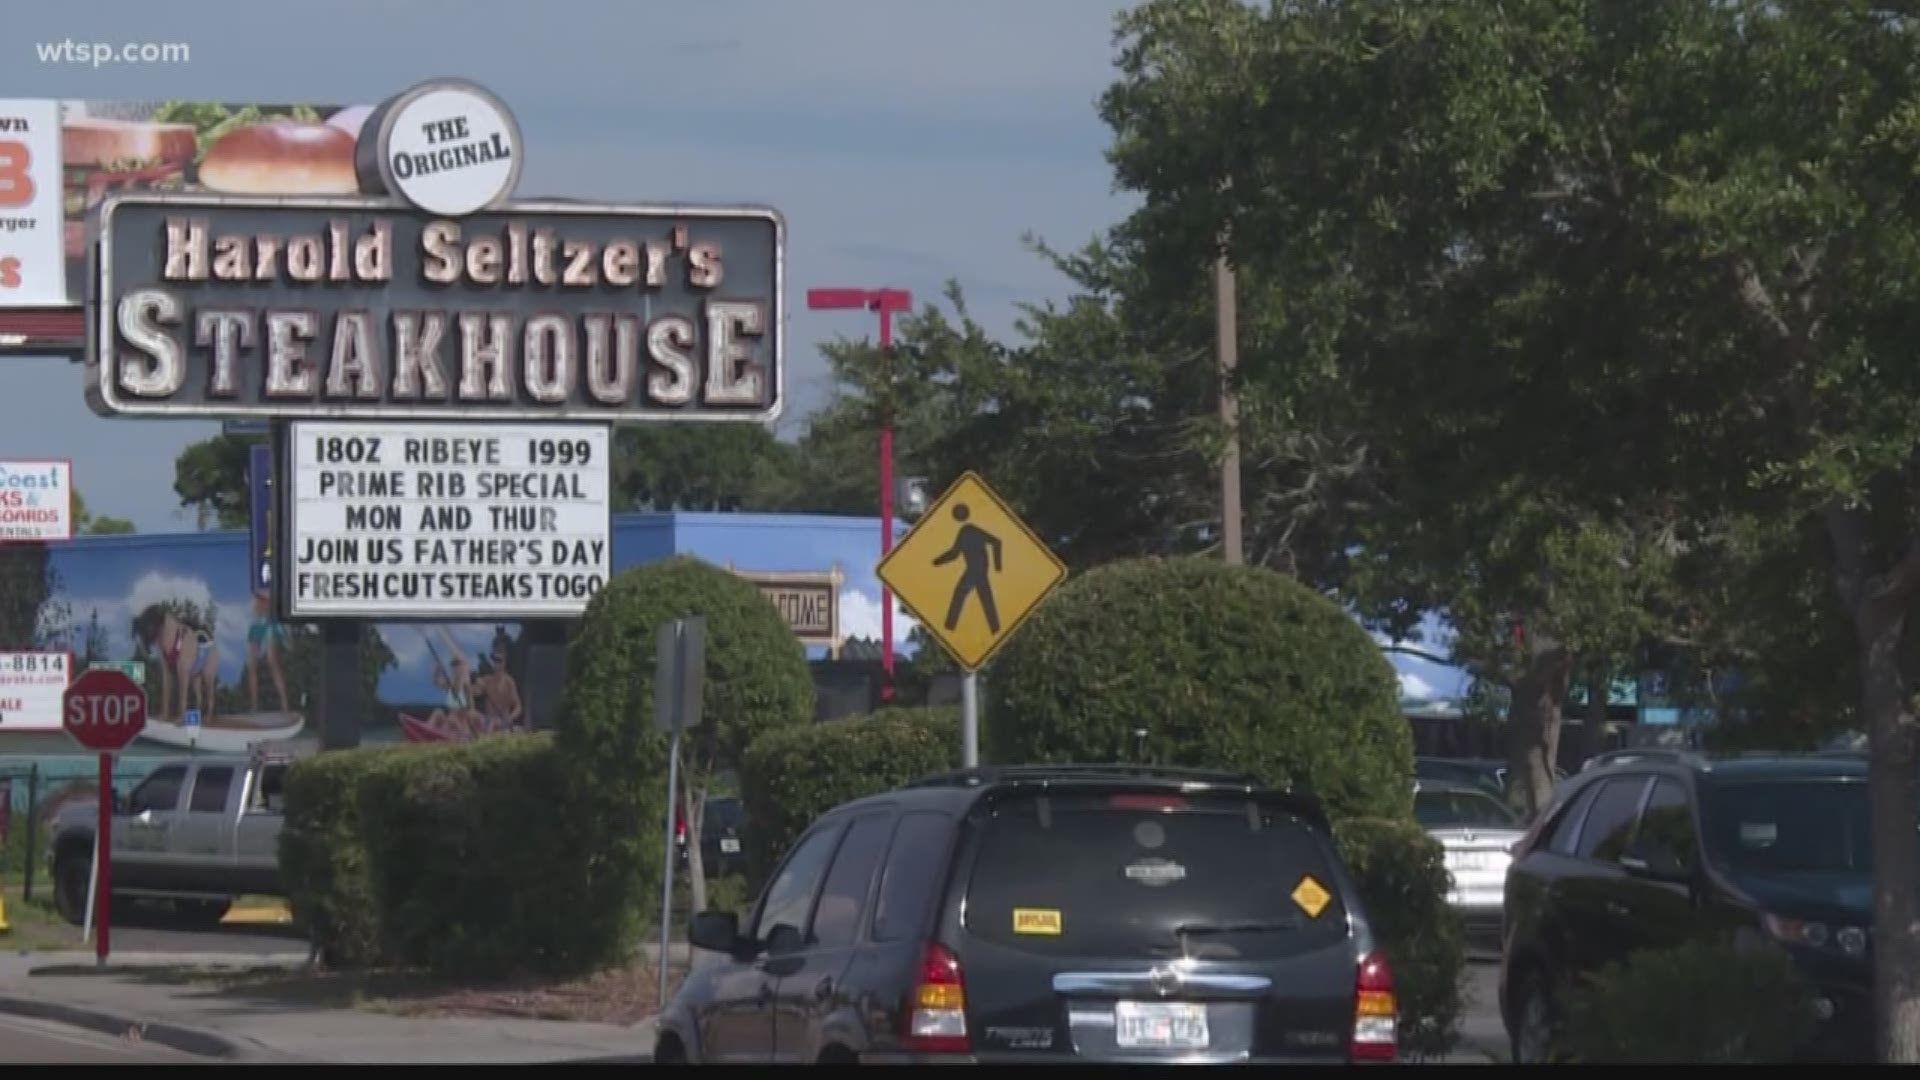 They're known for their giant bull statues on the outside and amazing prime rib cooked up in the kitchen.  But recently, some bad news for Harold Seltzer's Steakhouse in St. Pete. The restaurant was written up May 20th with 26 violations.